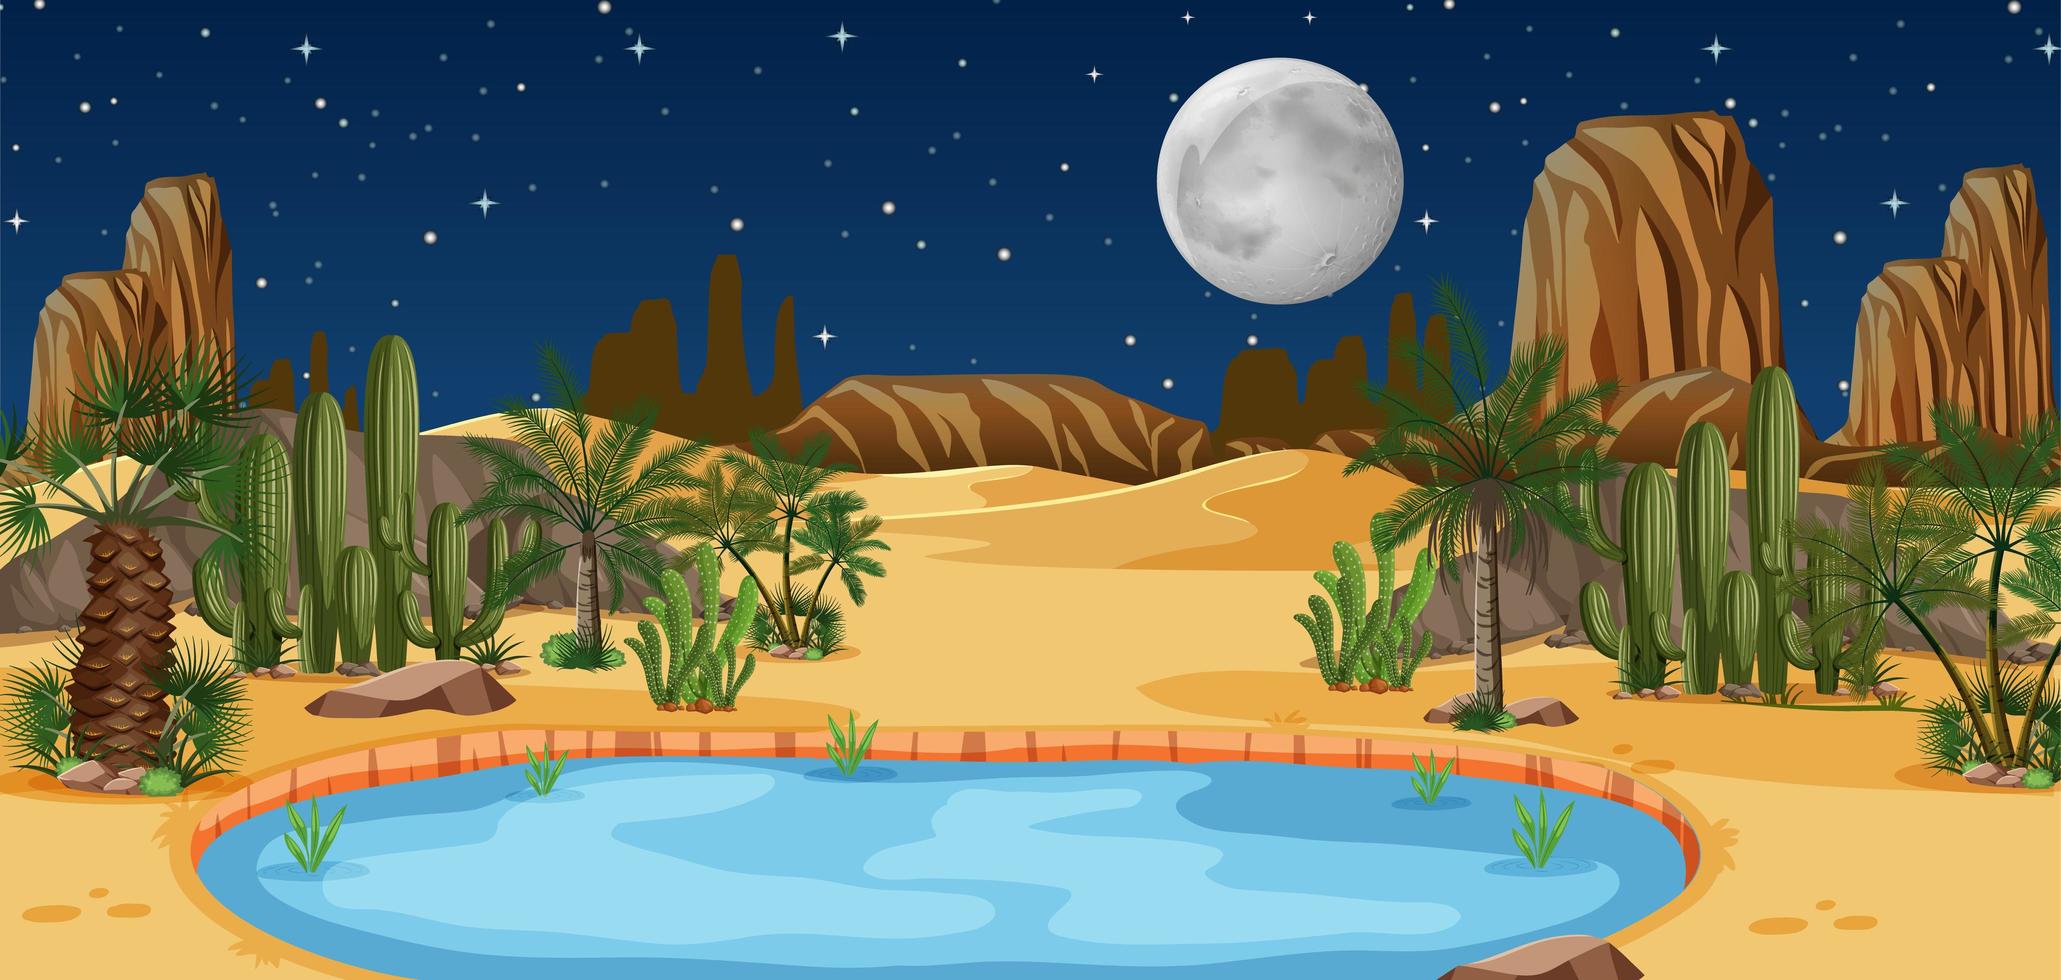 Desert oasis with palms and cactus nature landscape vector